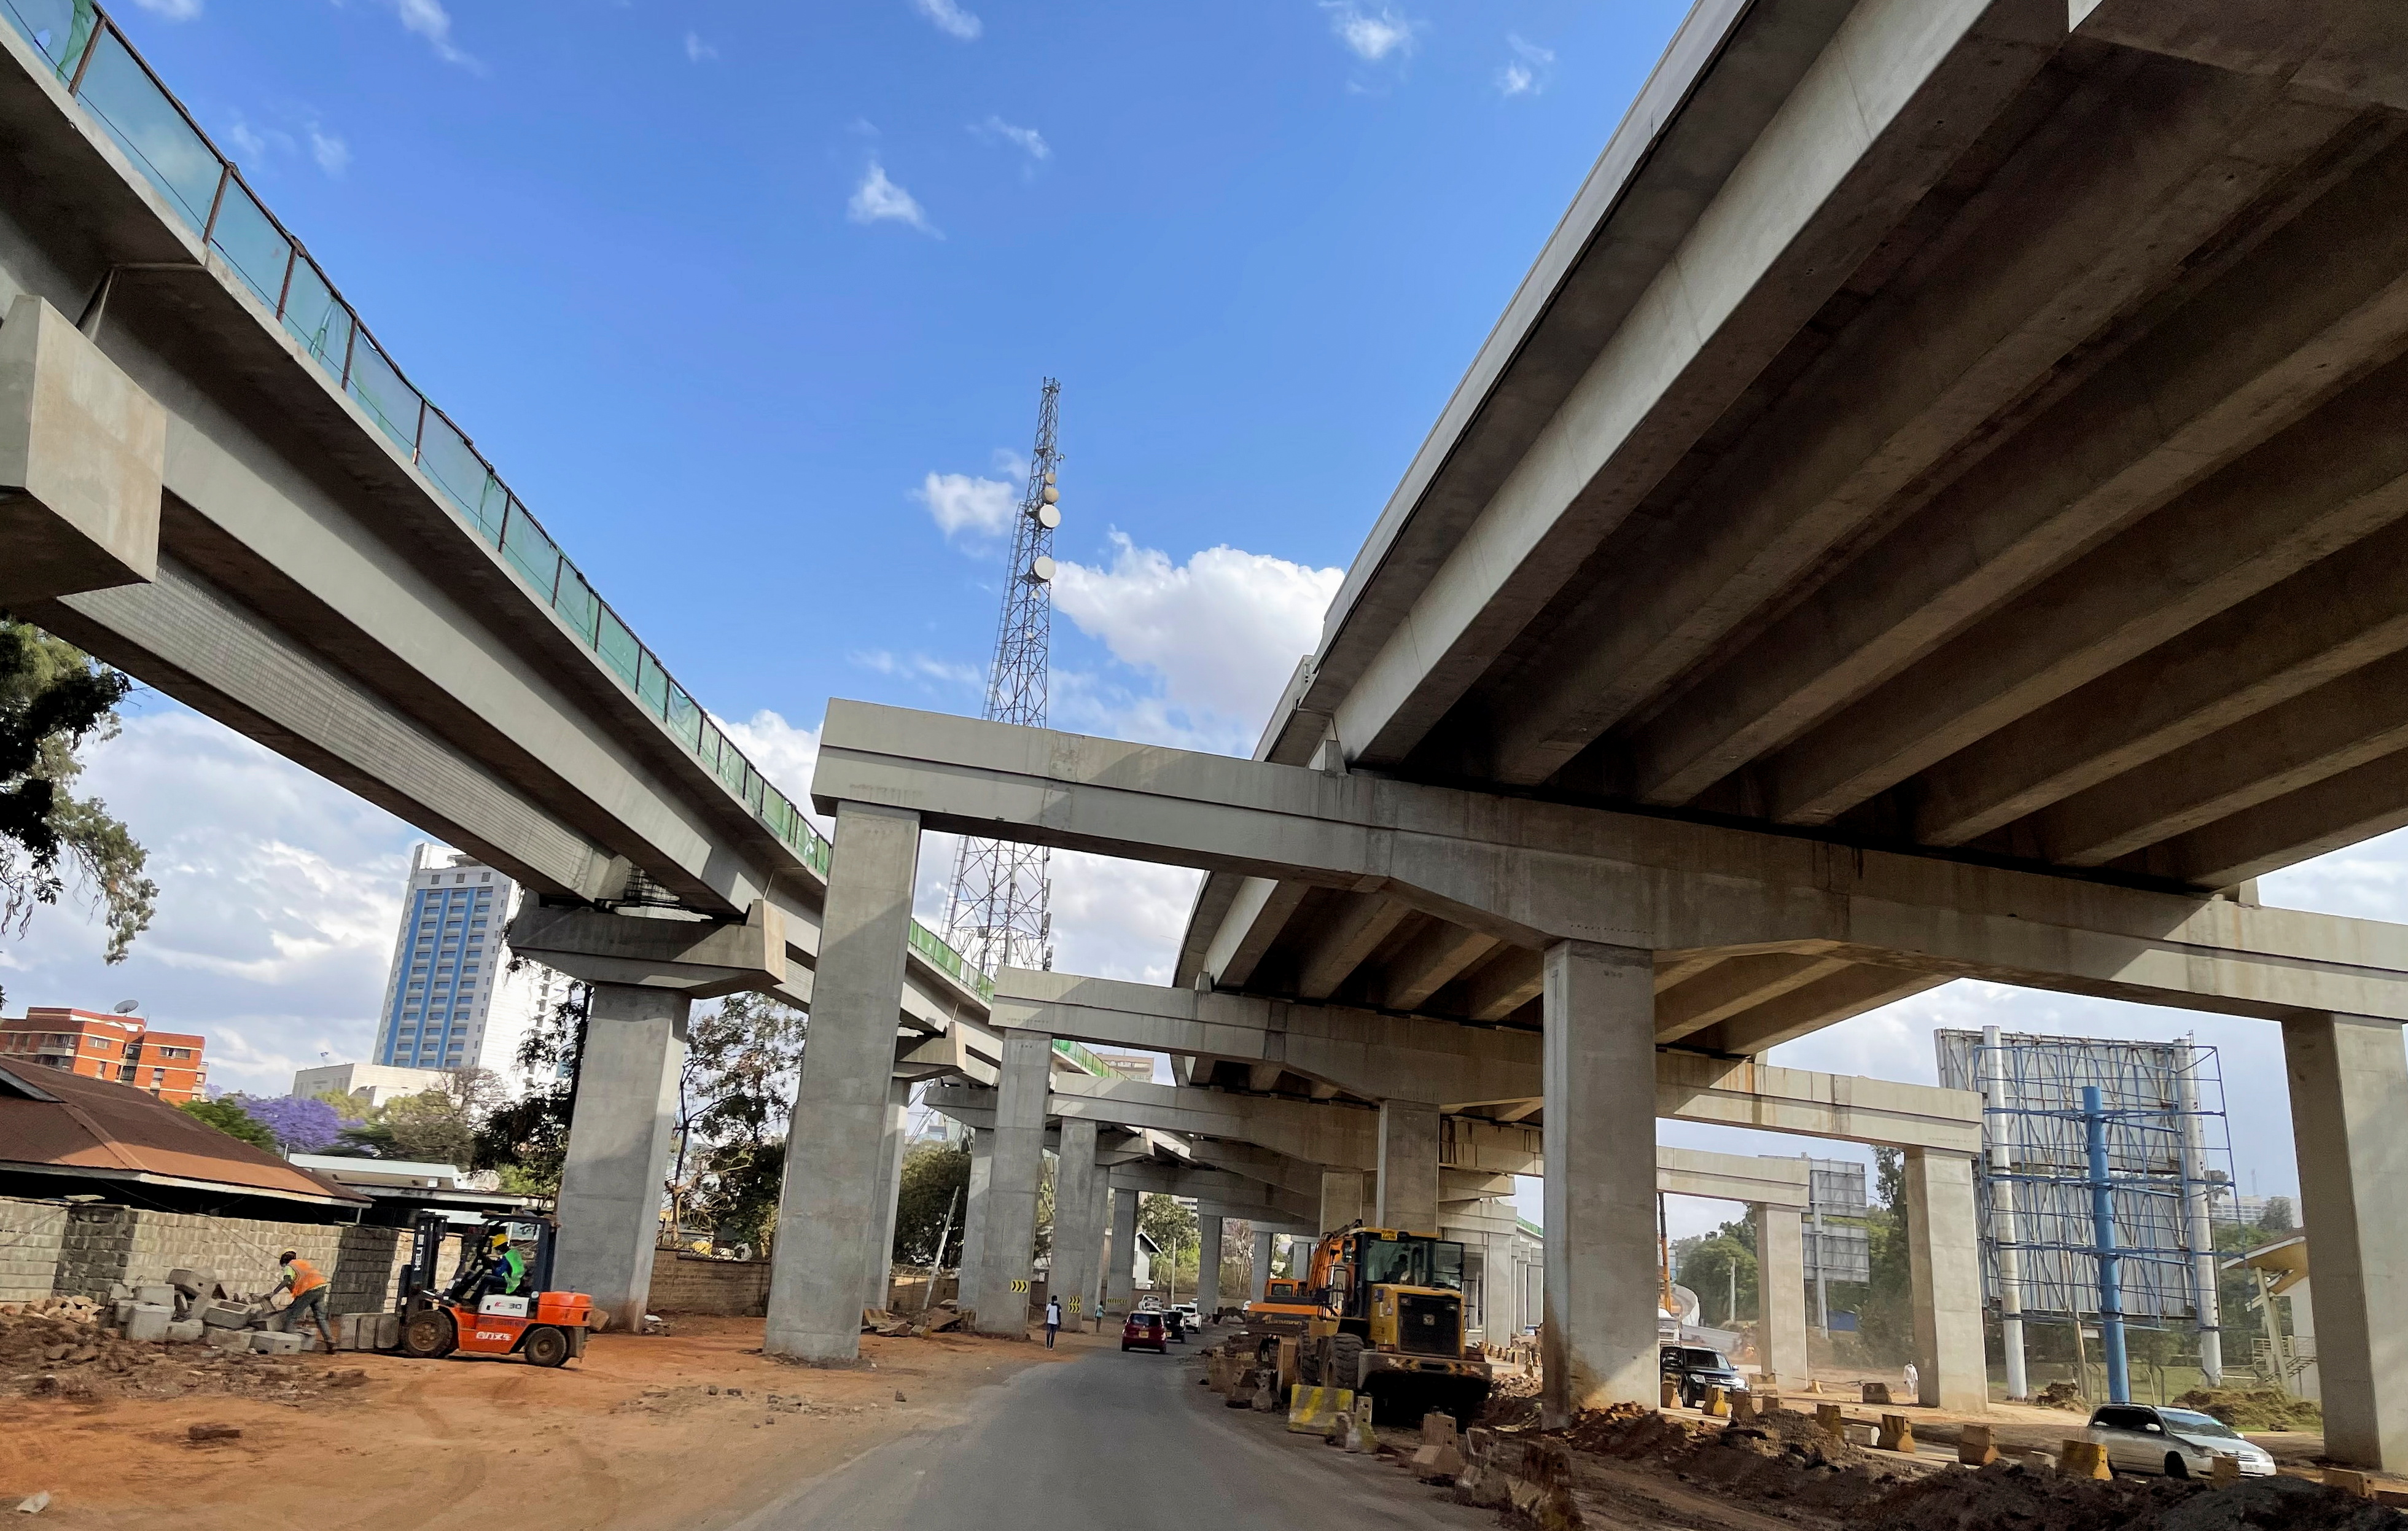 A view shows part of a construction site of the Nairobi Expressway, in Nairobi